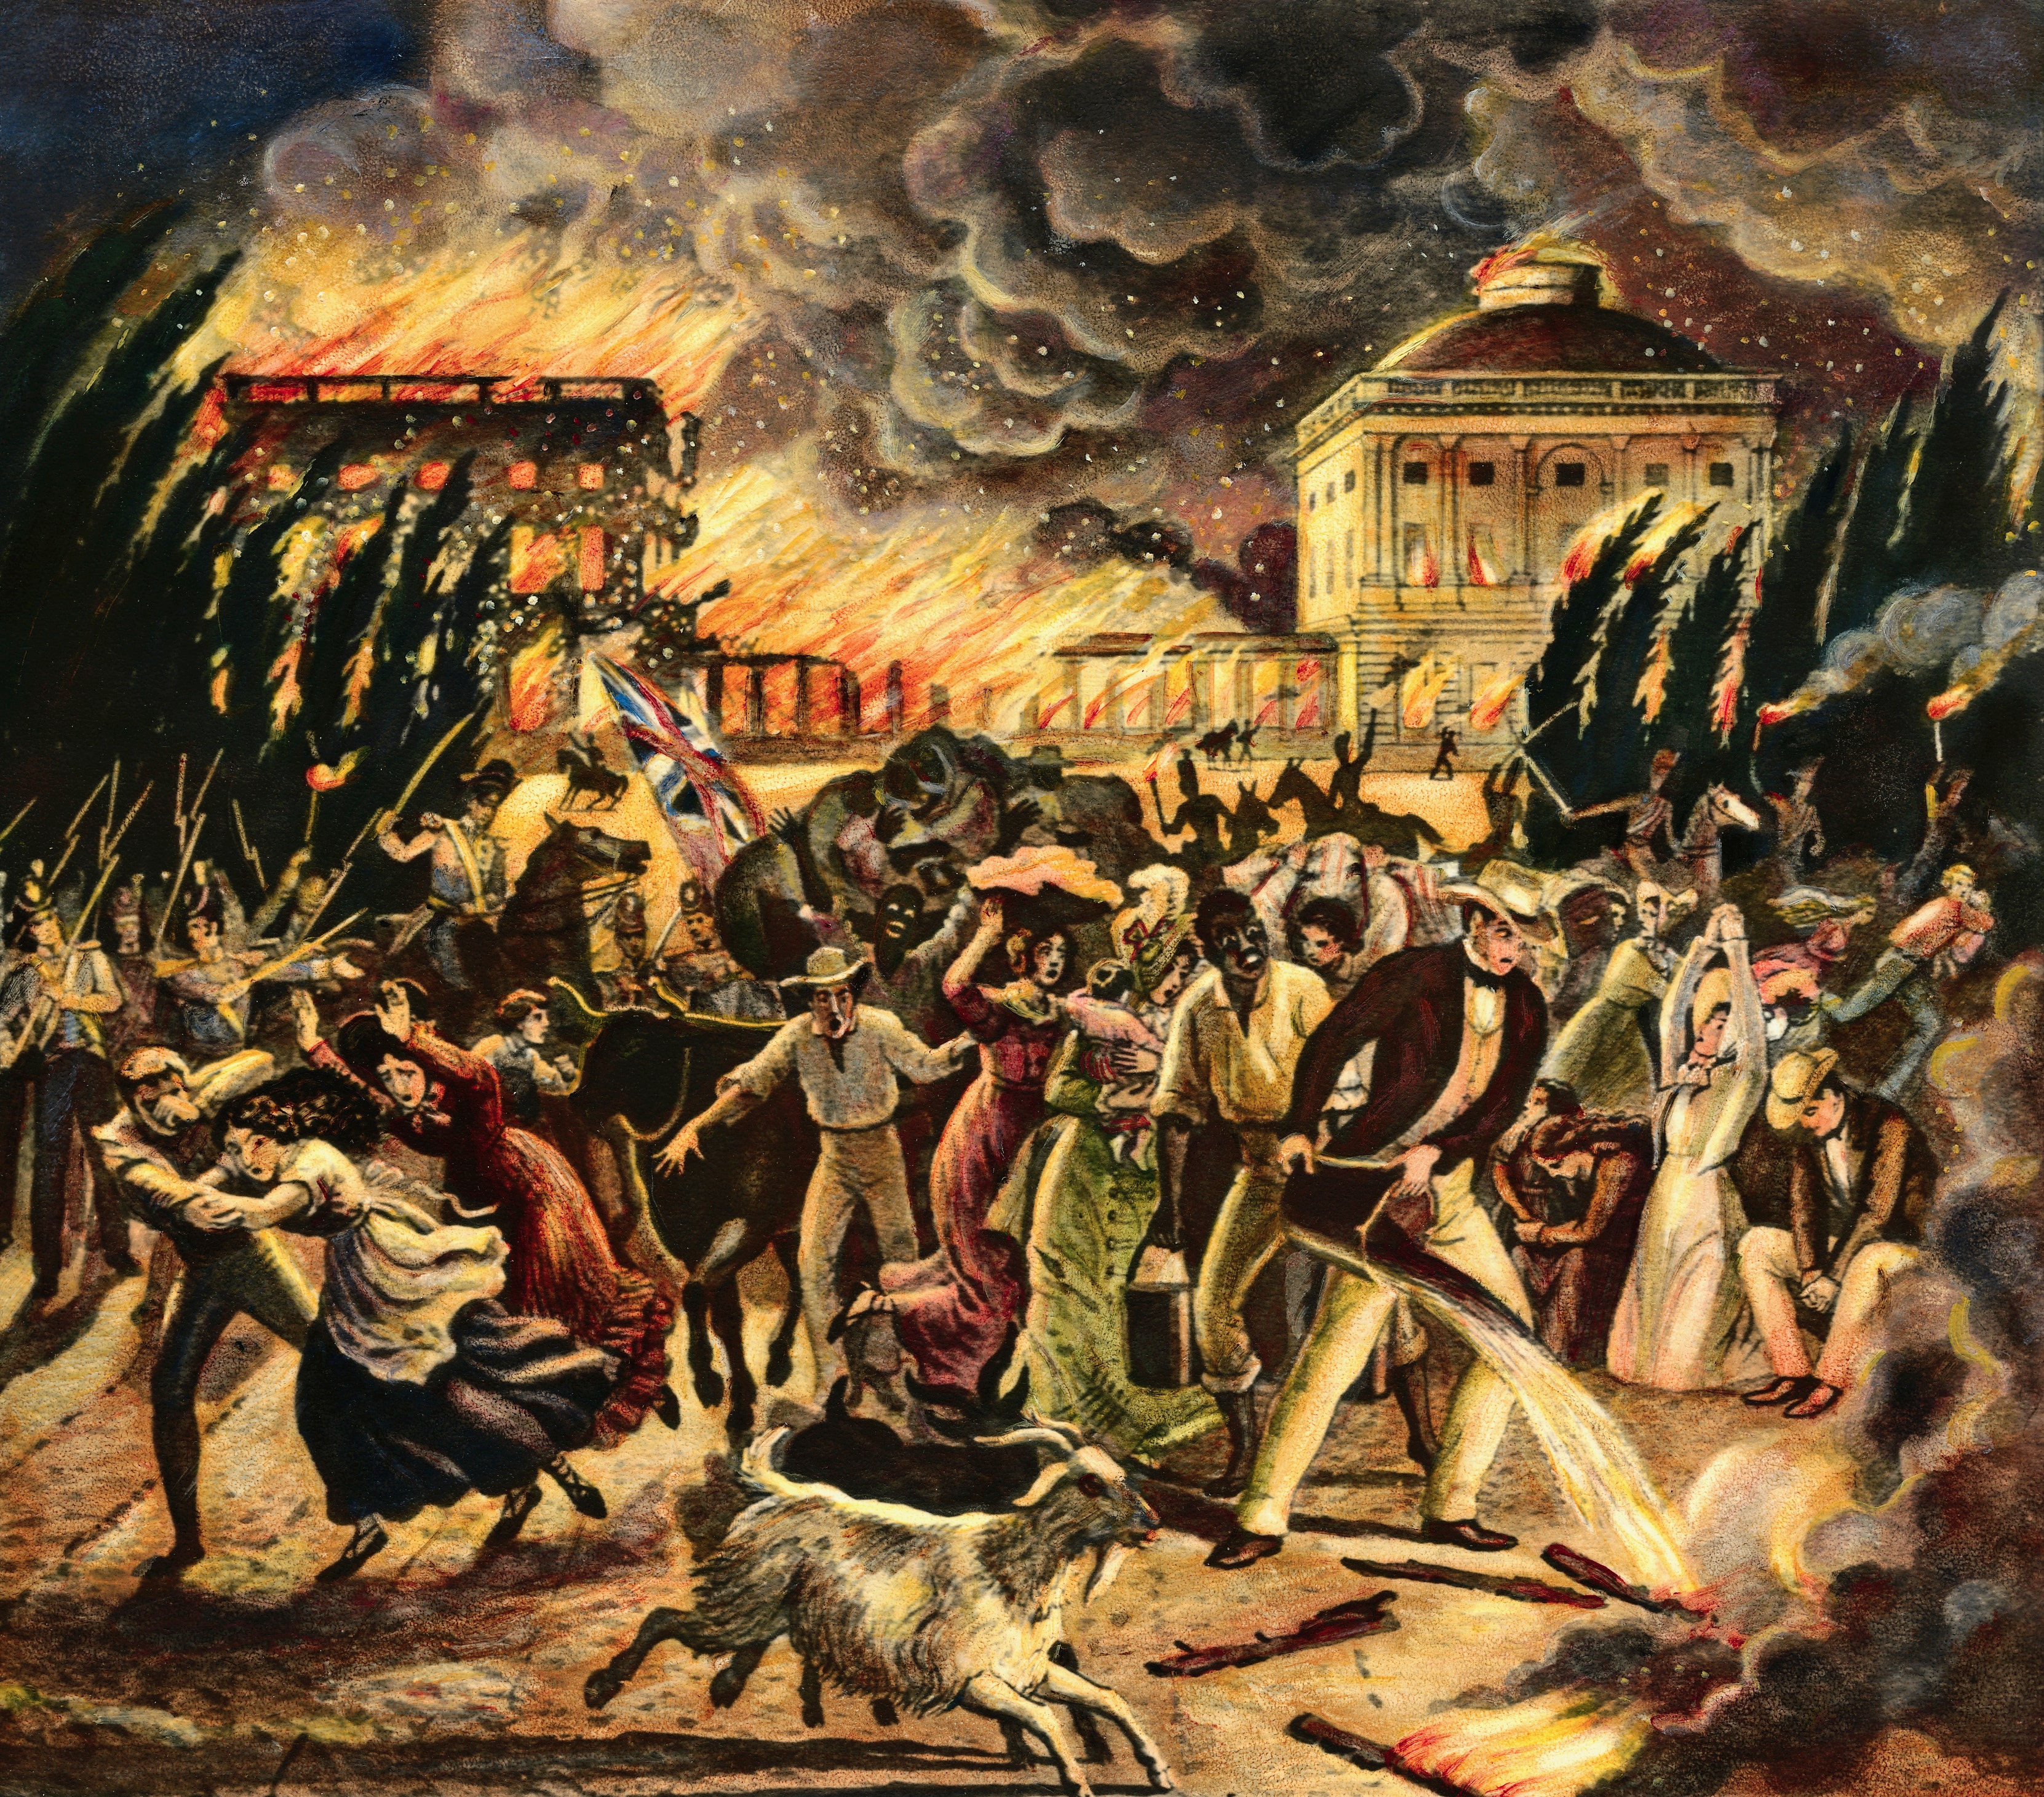 On this day in history, August 24, 1814, British troops ransacked, torched White House and Capitol